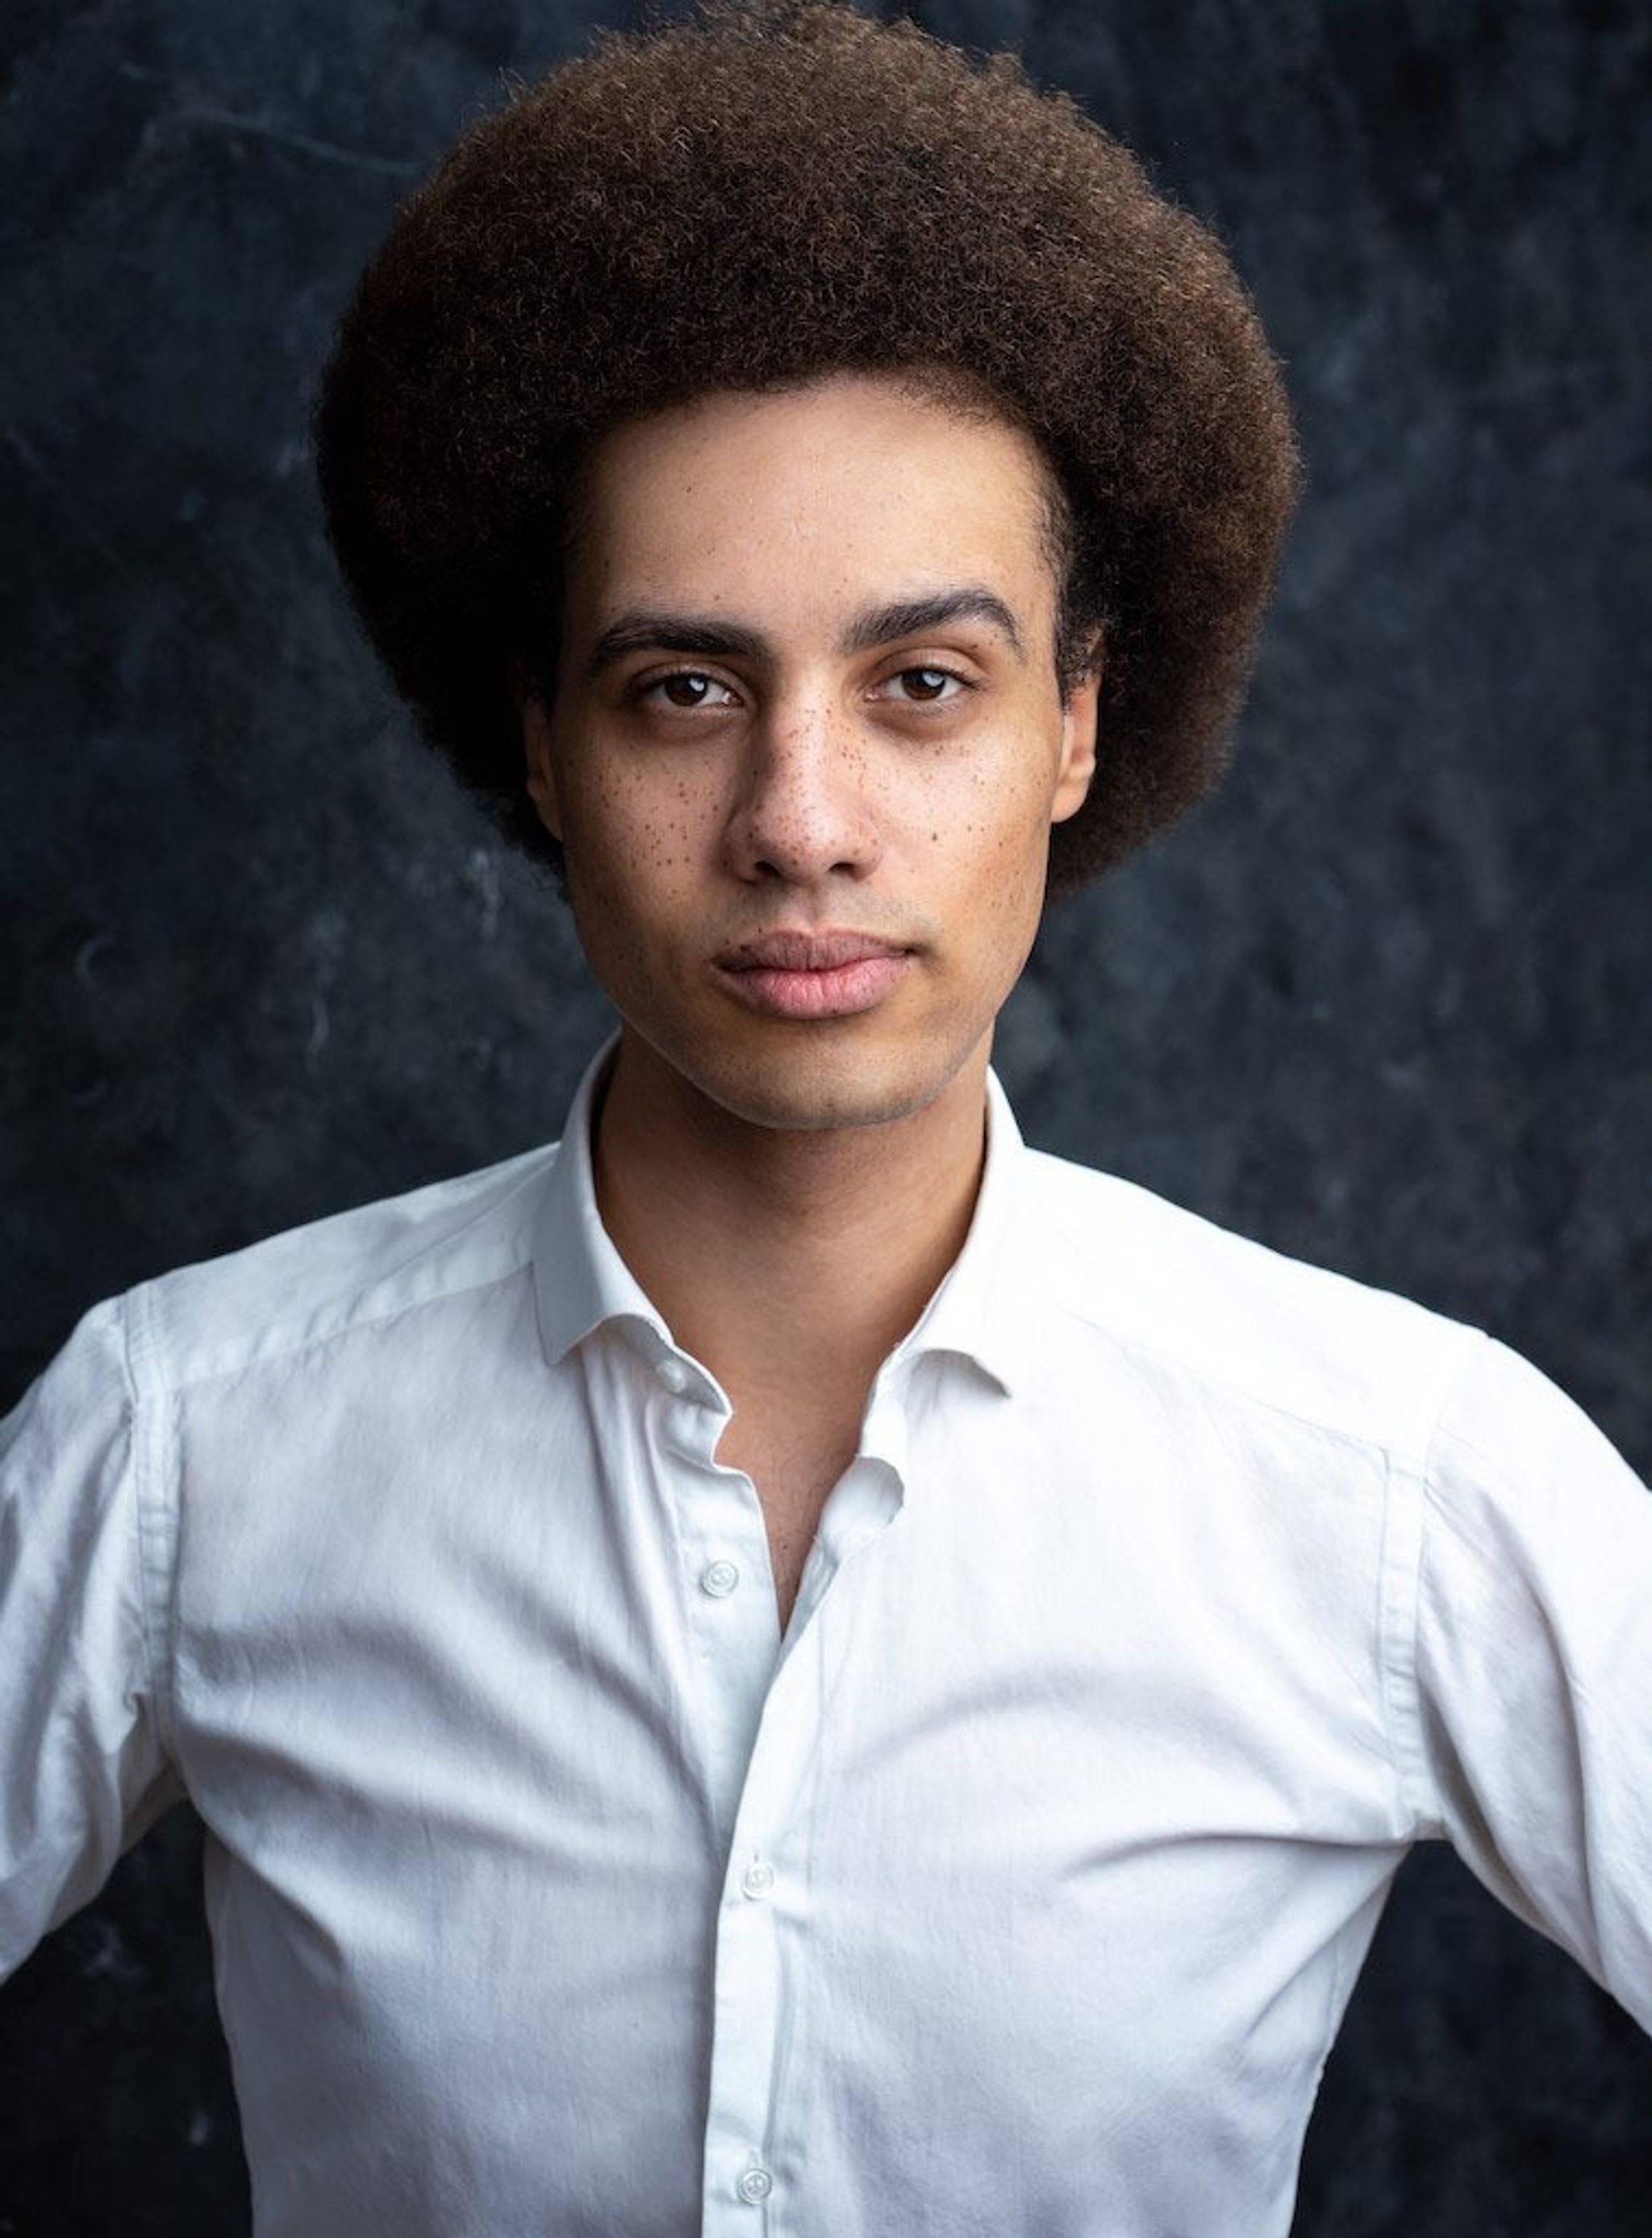 A portrait of Liam Godwin. Liam has an afro and stands with arms out, hands on hips. He looks intently with one eyebrow arched and wears a white button down shirt.